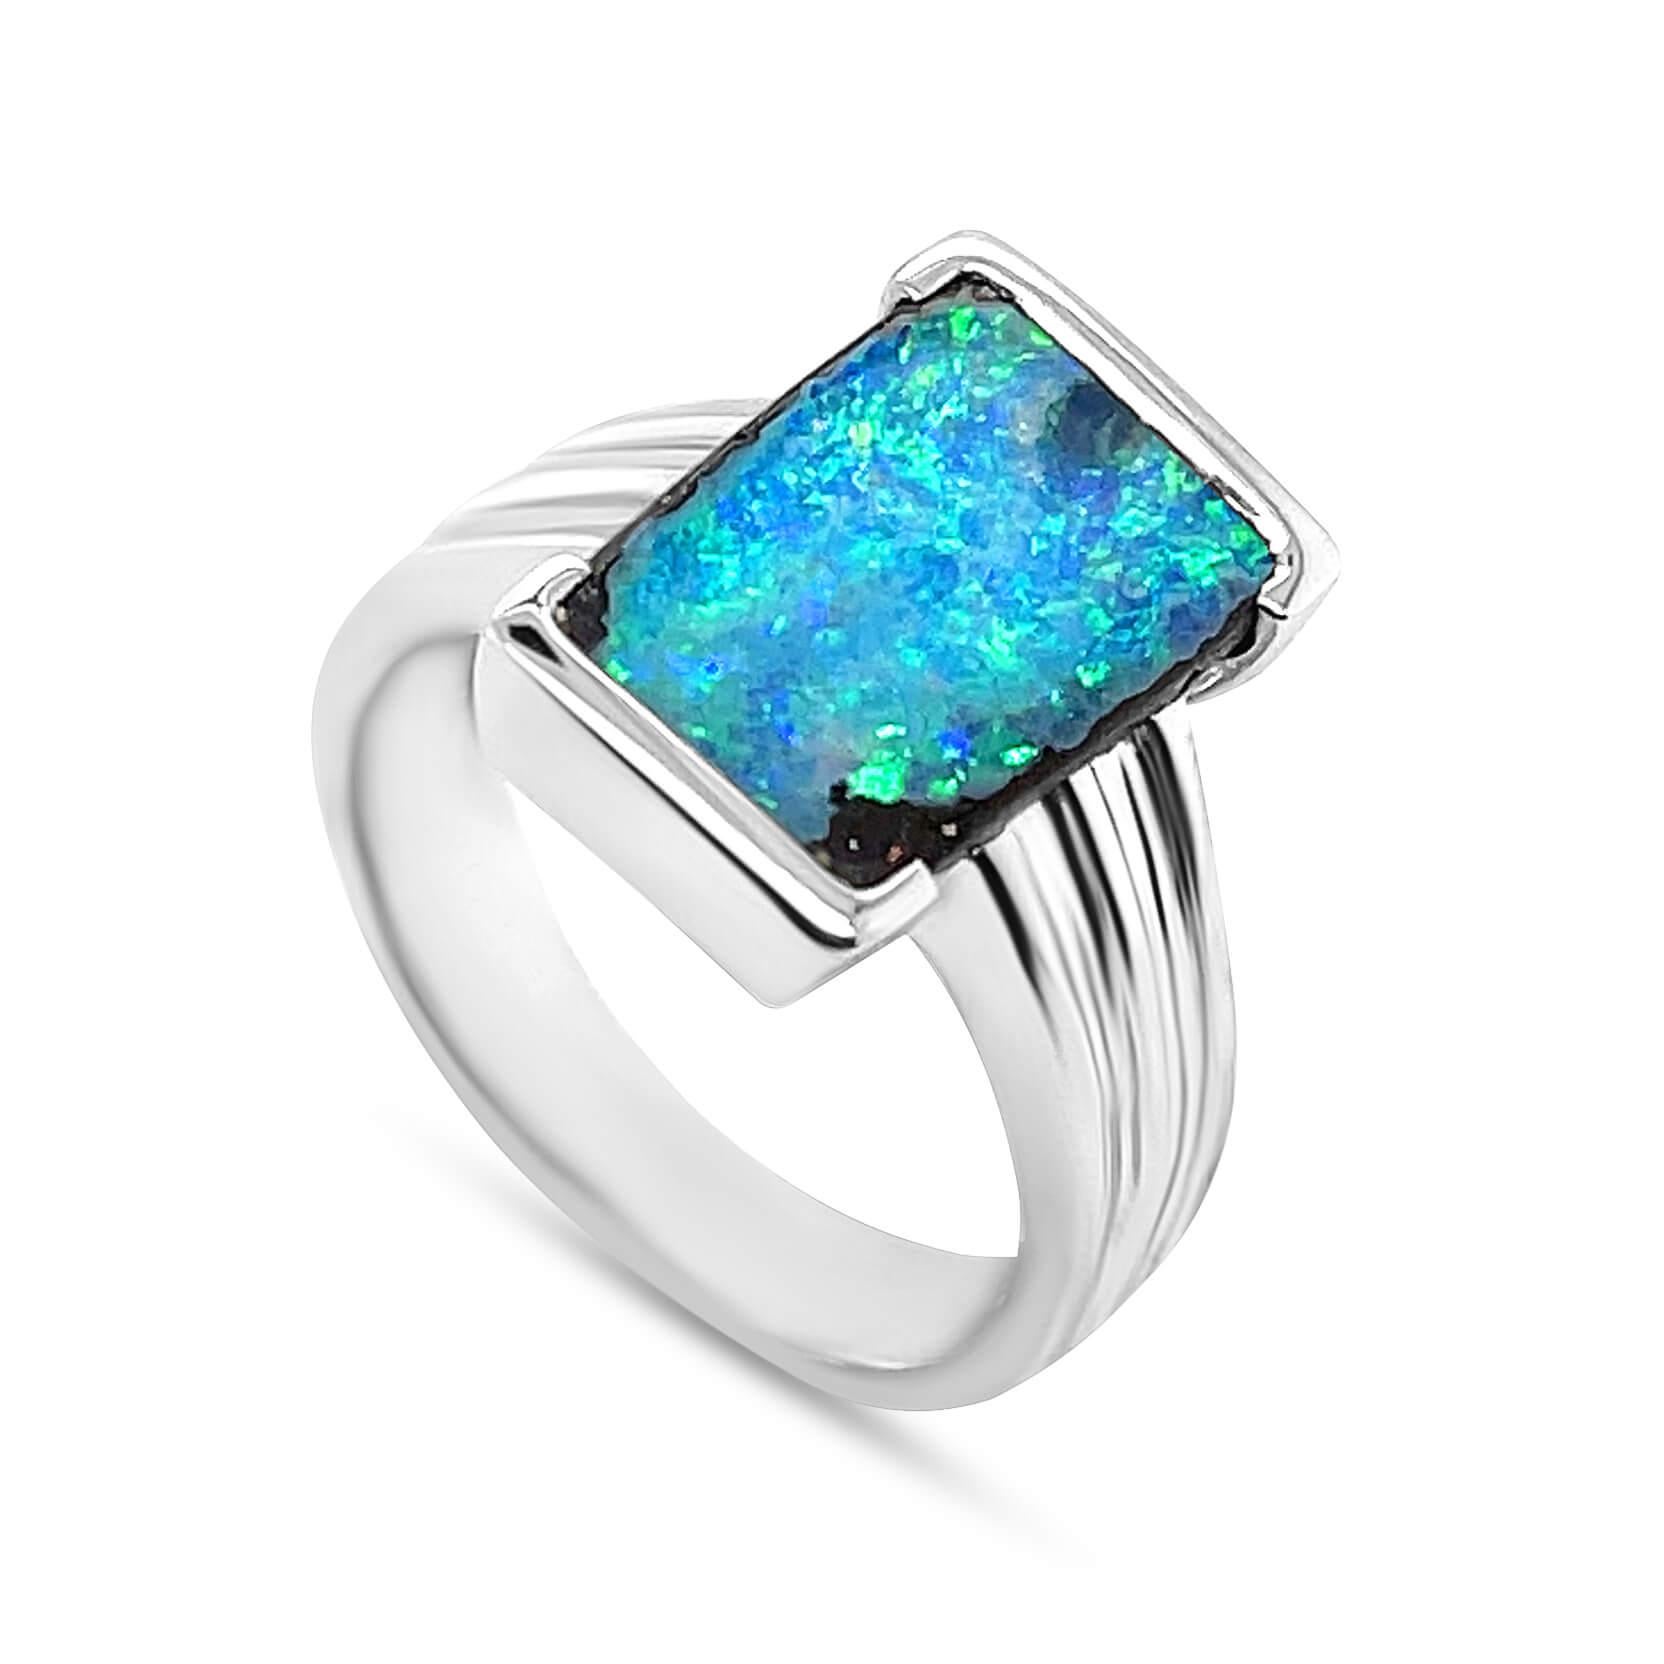 Captivating in its entirety, the 'Uncharted Seas' opal ring presents an impressive boulder opal (3.77ct) from our Jundah-Opalville mines in Queensland. The precious gemstone's colour play is reminiscent of the vast deep ocean and all its hidden